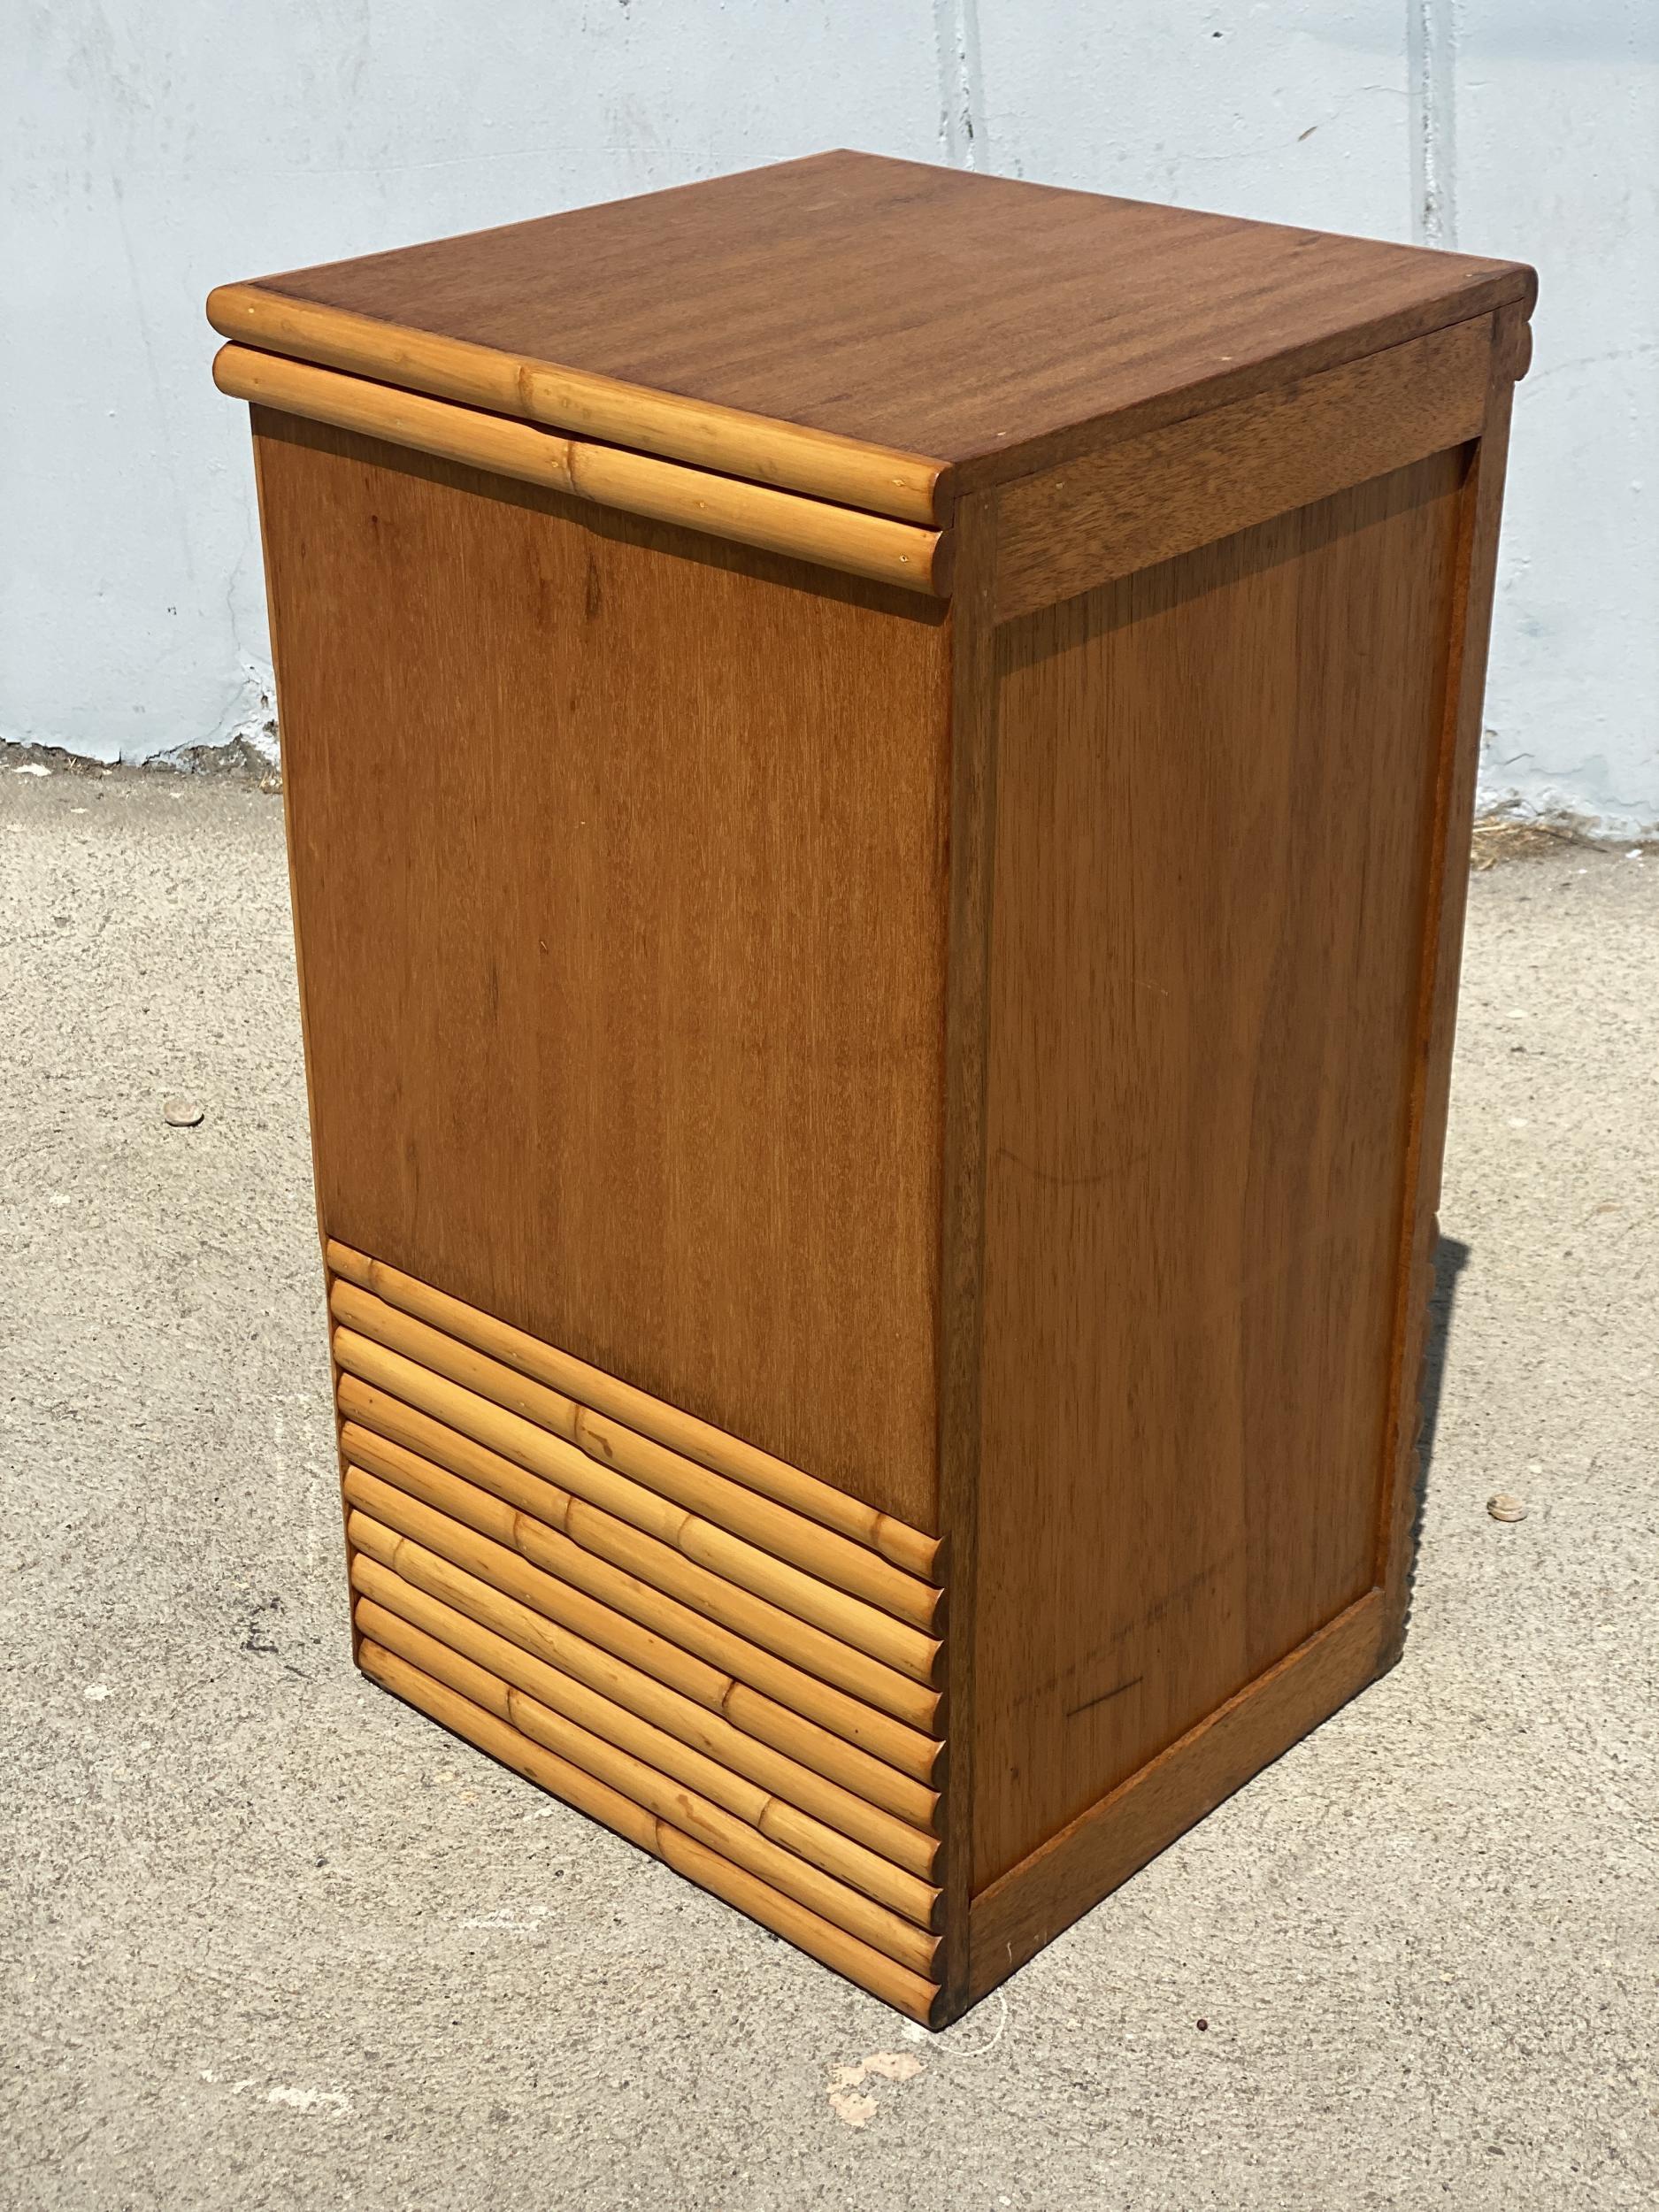 Mid-20th Century Restored Single Drawer Mahogany Bedside Table with Stacked Rattan Border